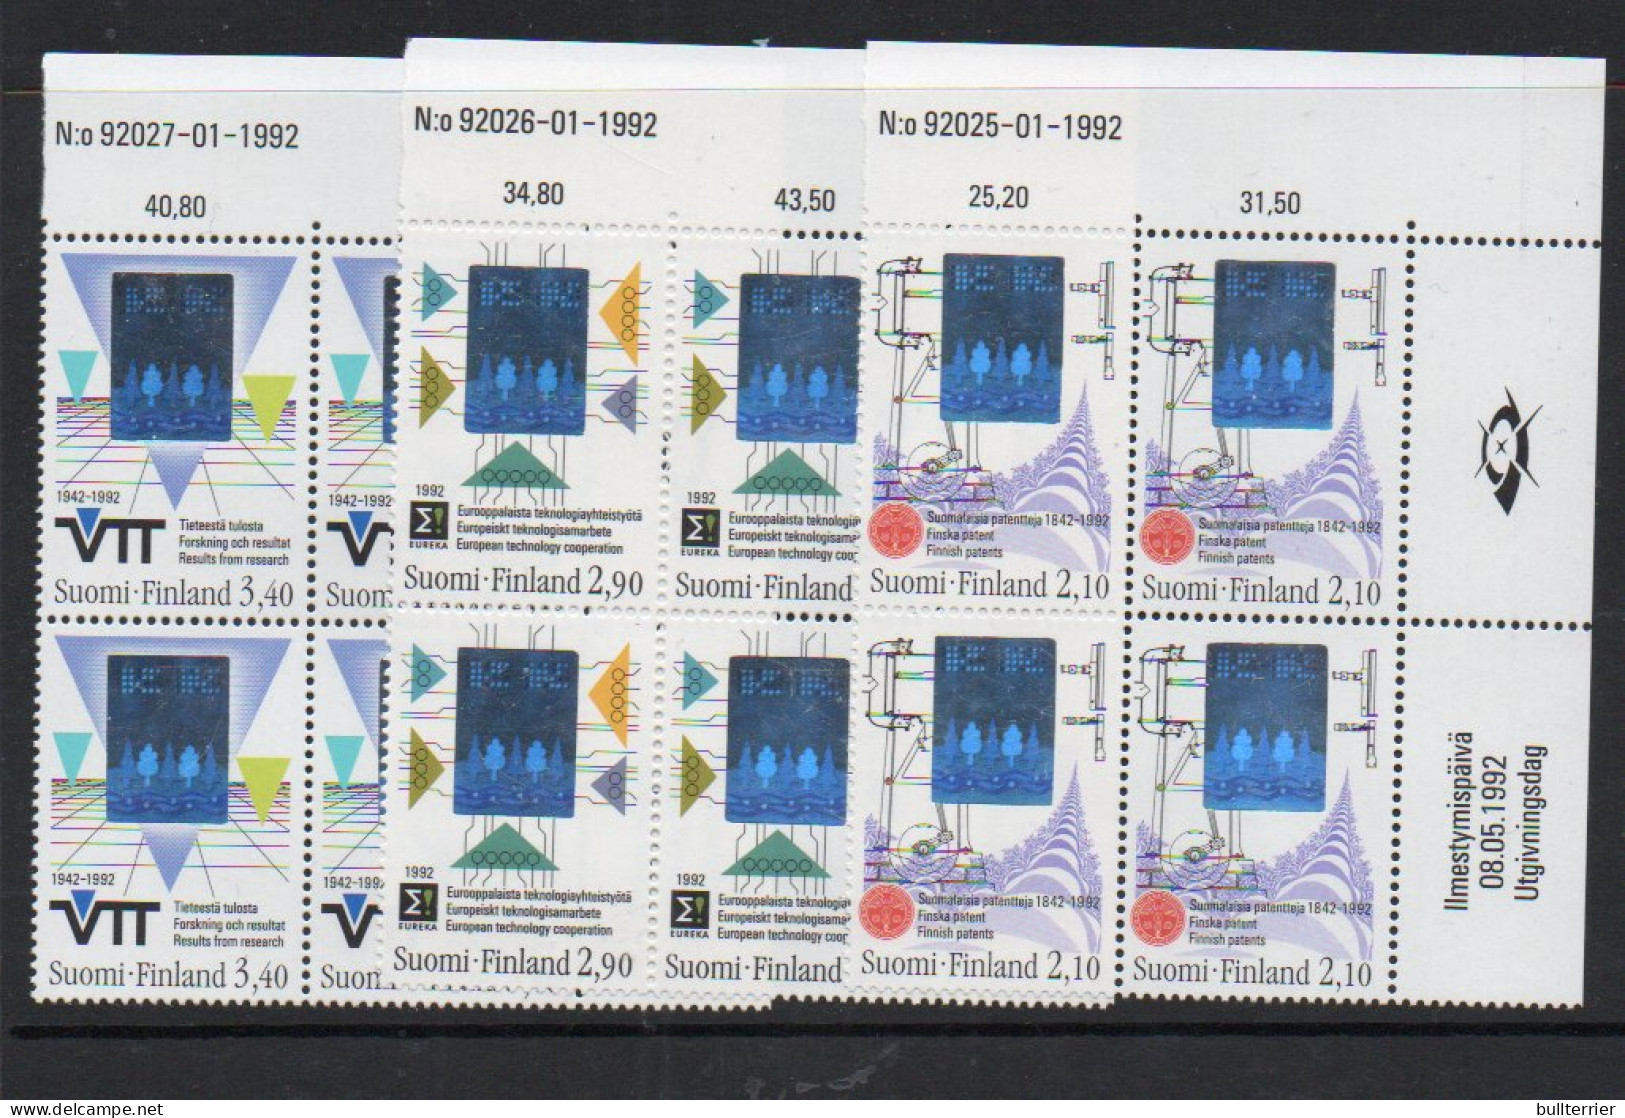 HOLOGRAMS - FINLAND - 1992 -TECHNOLOGY HOLOGRAMS SET OF 3 IN BLOCKS OF 4 MINT NEVER HINGED, SG CAT £35 - Ologrammi